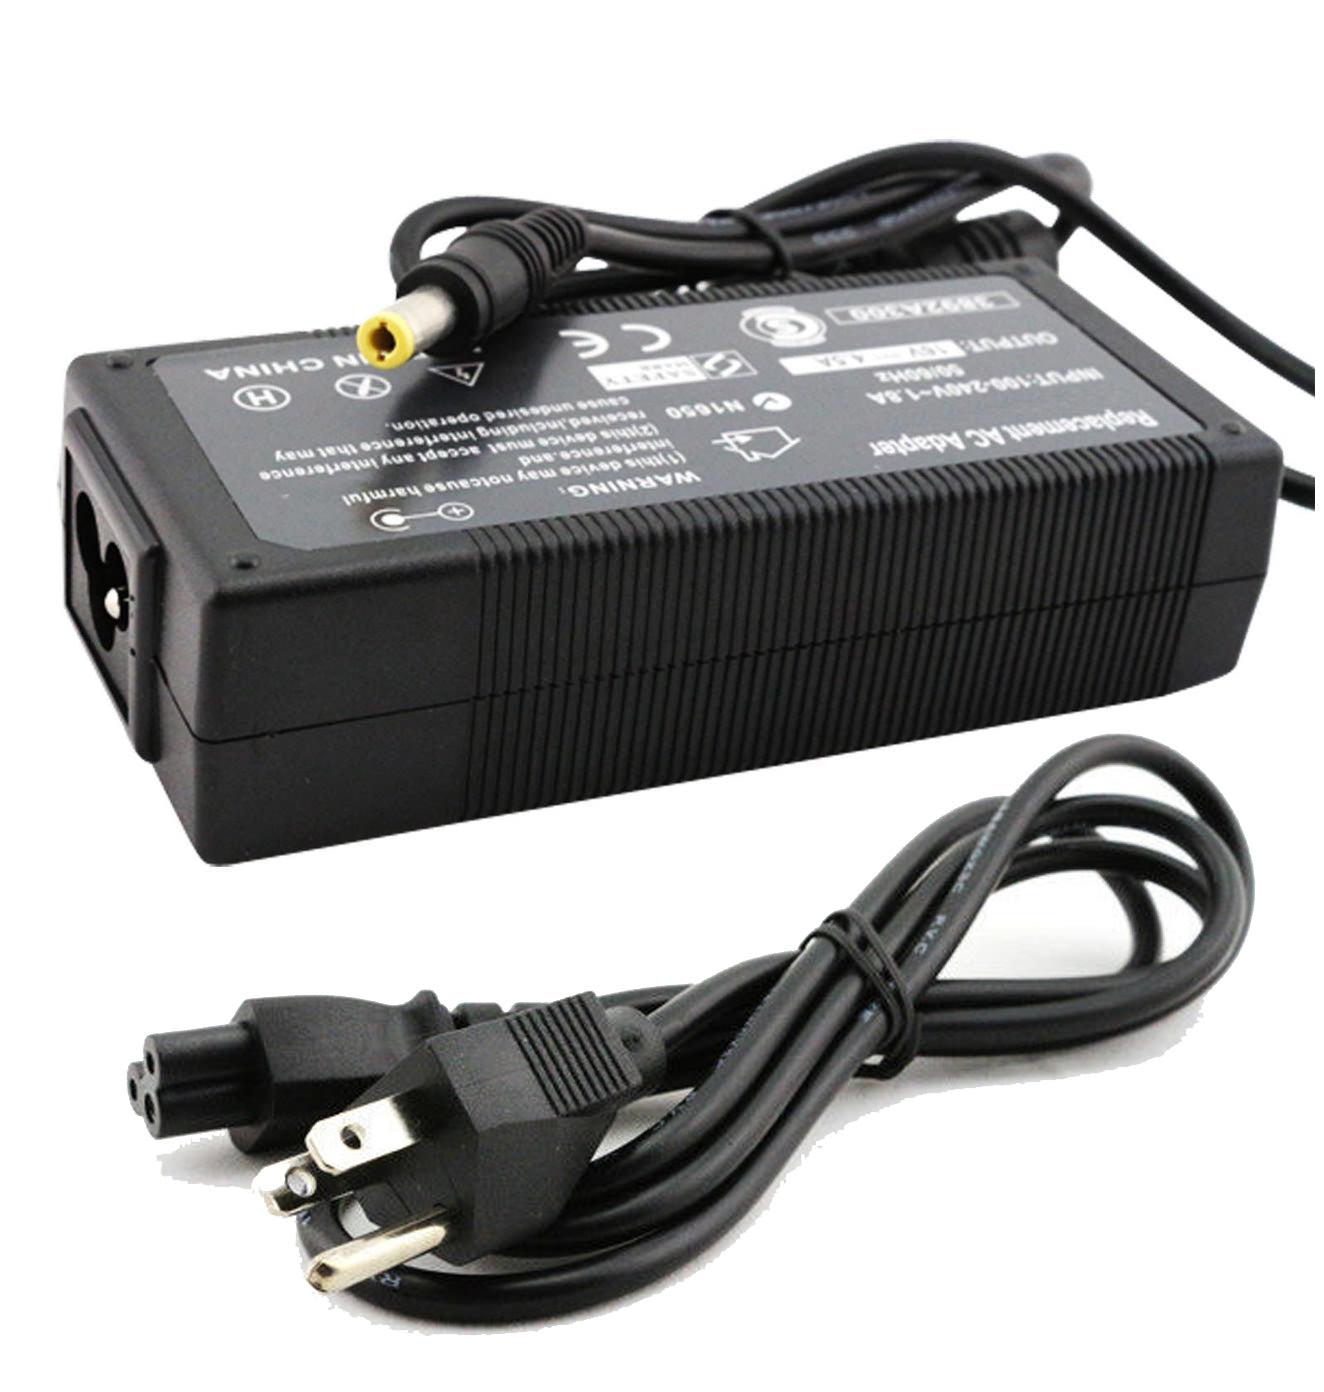 AC Adapter Charger for Panasonic Toughbook CF-T4 Notebook.